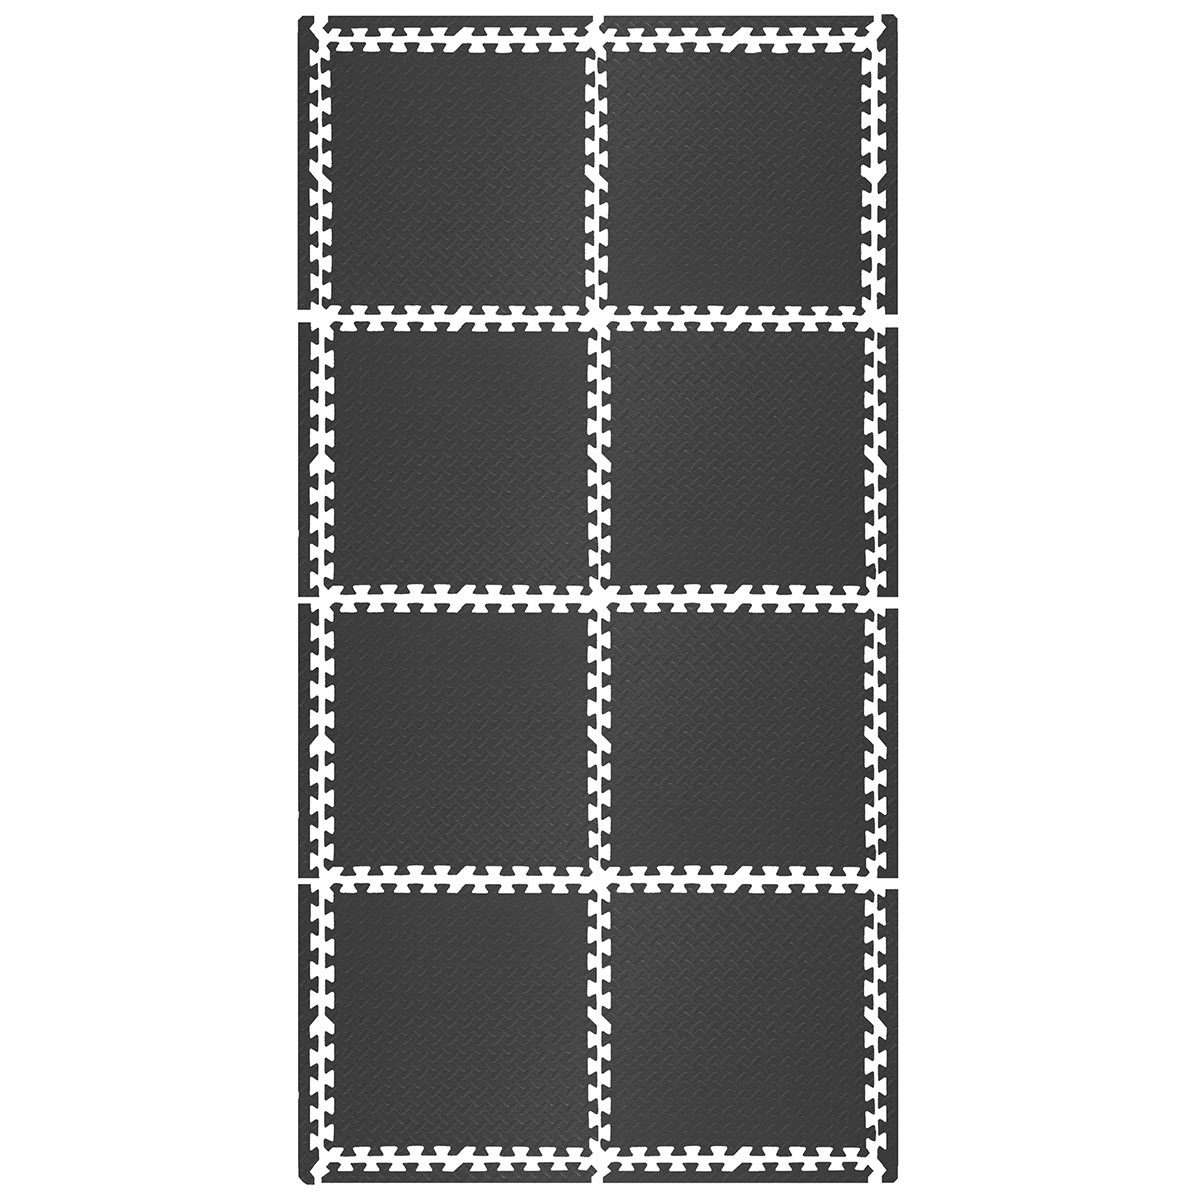 IMAGE of 8 squares showing how they interlock